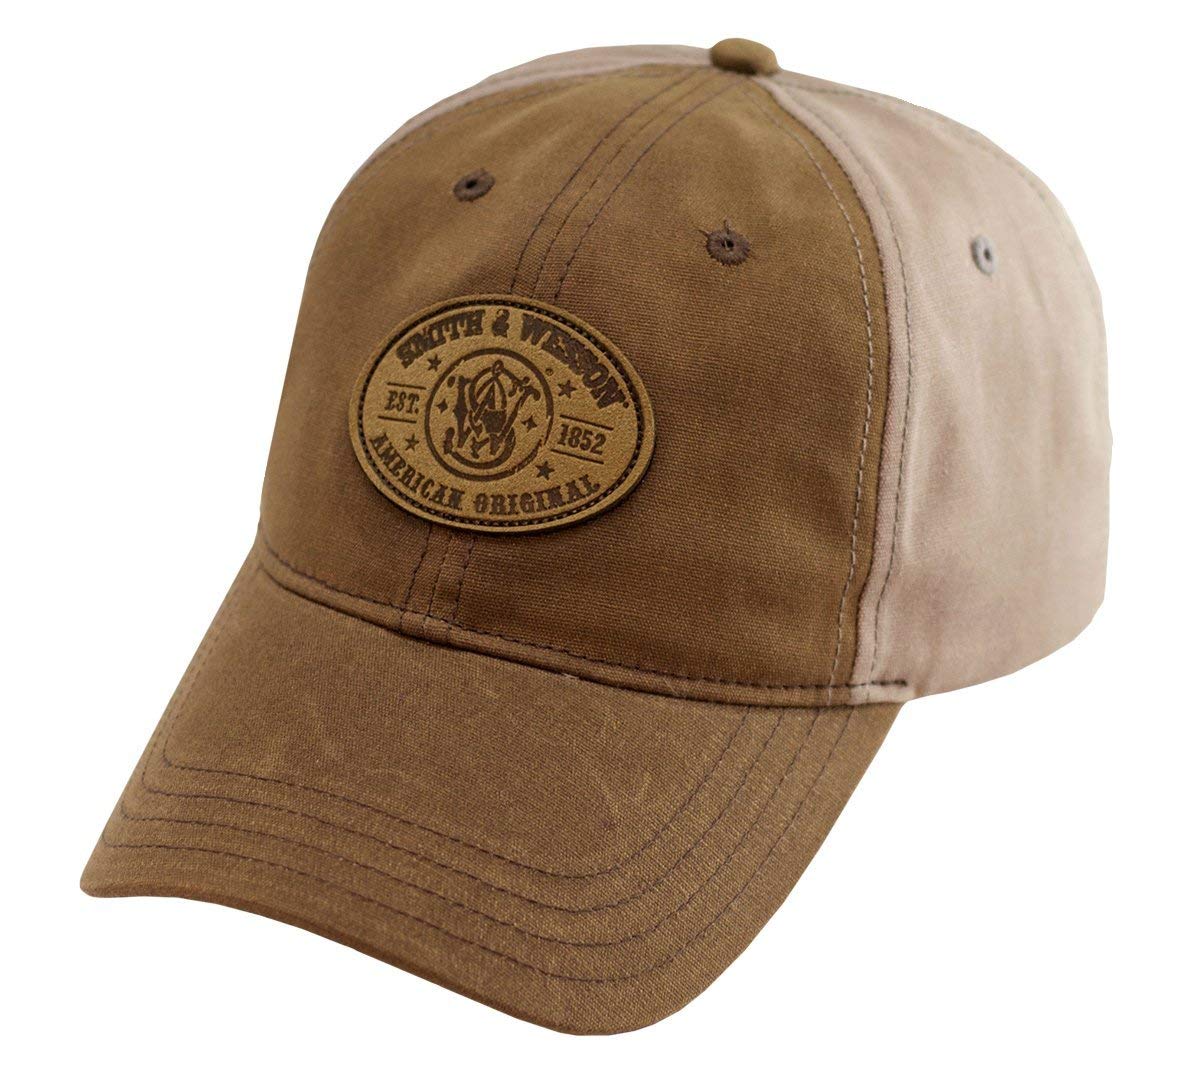 S&W Tan Leather Oval Patch Logo Cap - A1816